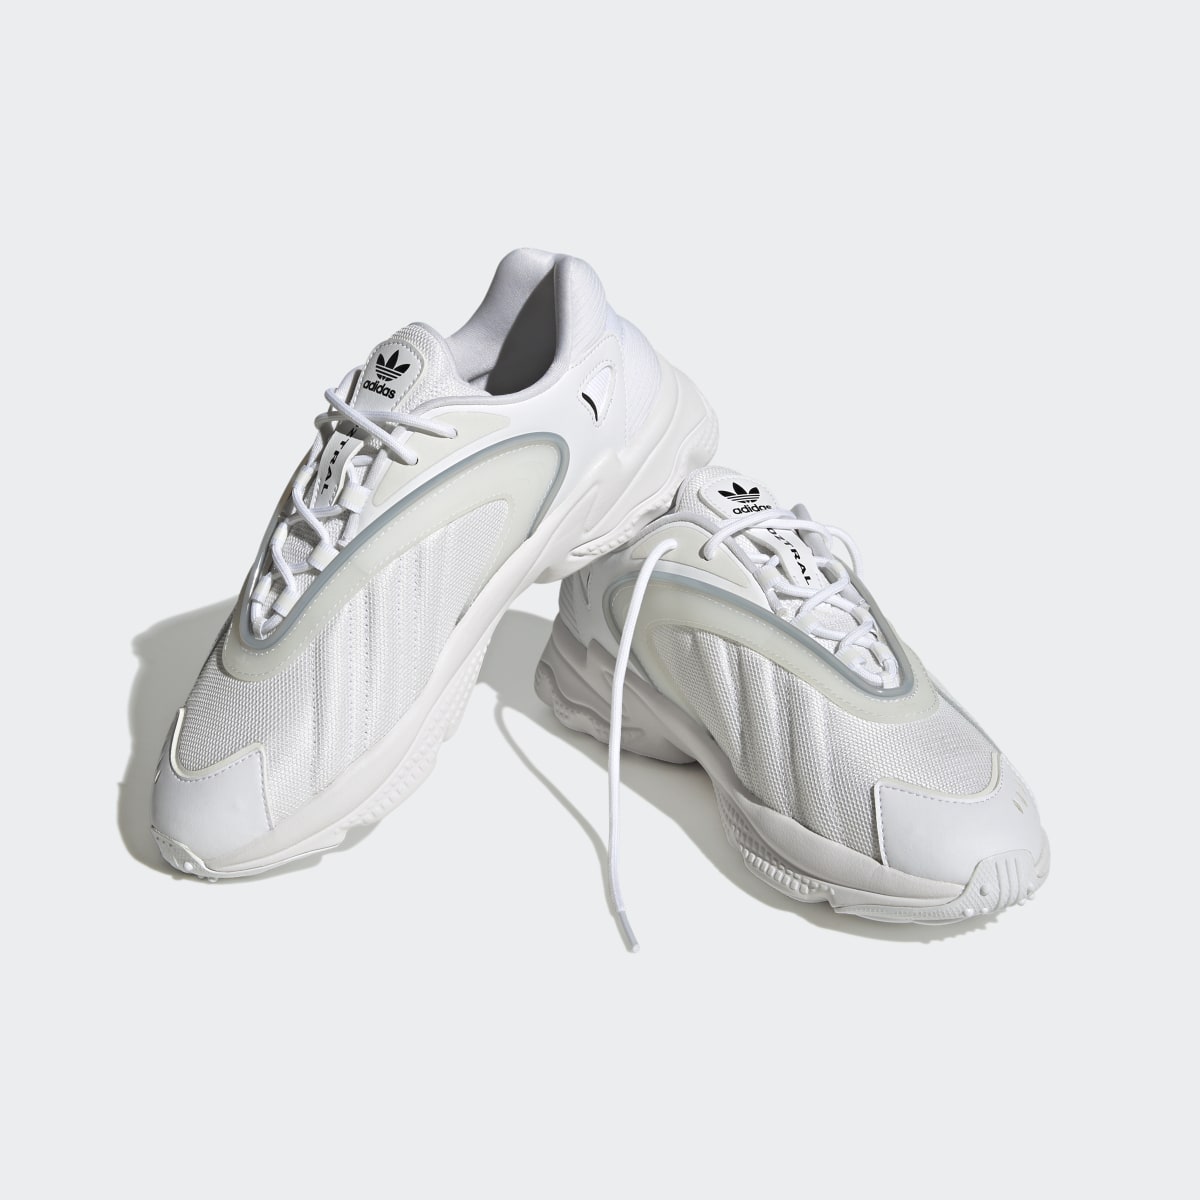 Adidas Oztral Shoes. 5